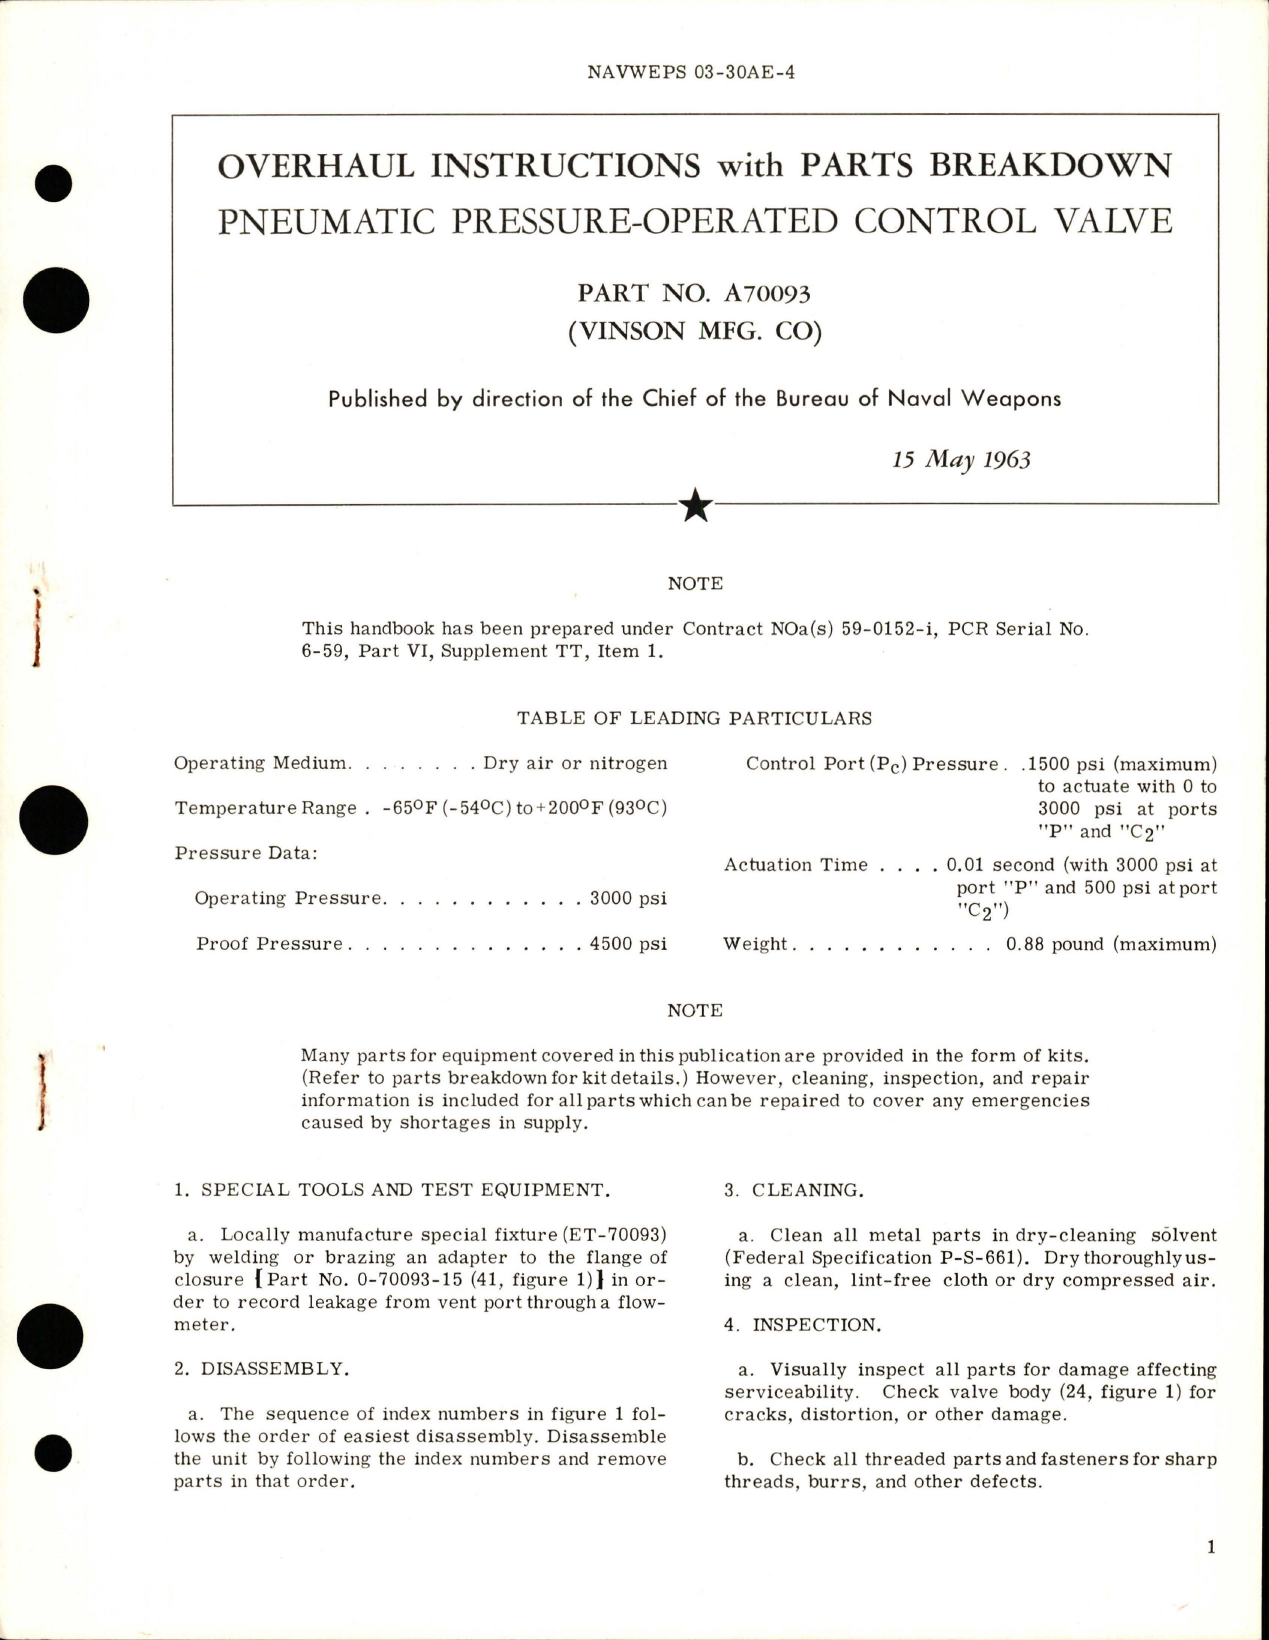 Sample page 1 from AirCorps Library document: Overhaul Instructions with Parts Breakdown for Pneumatic Pressure-Operated Control Valve - Part A70093